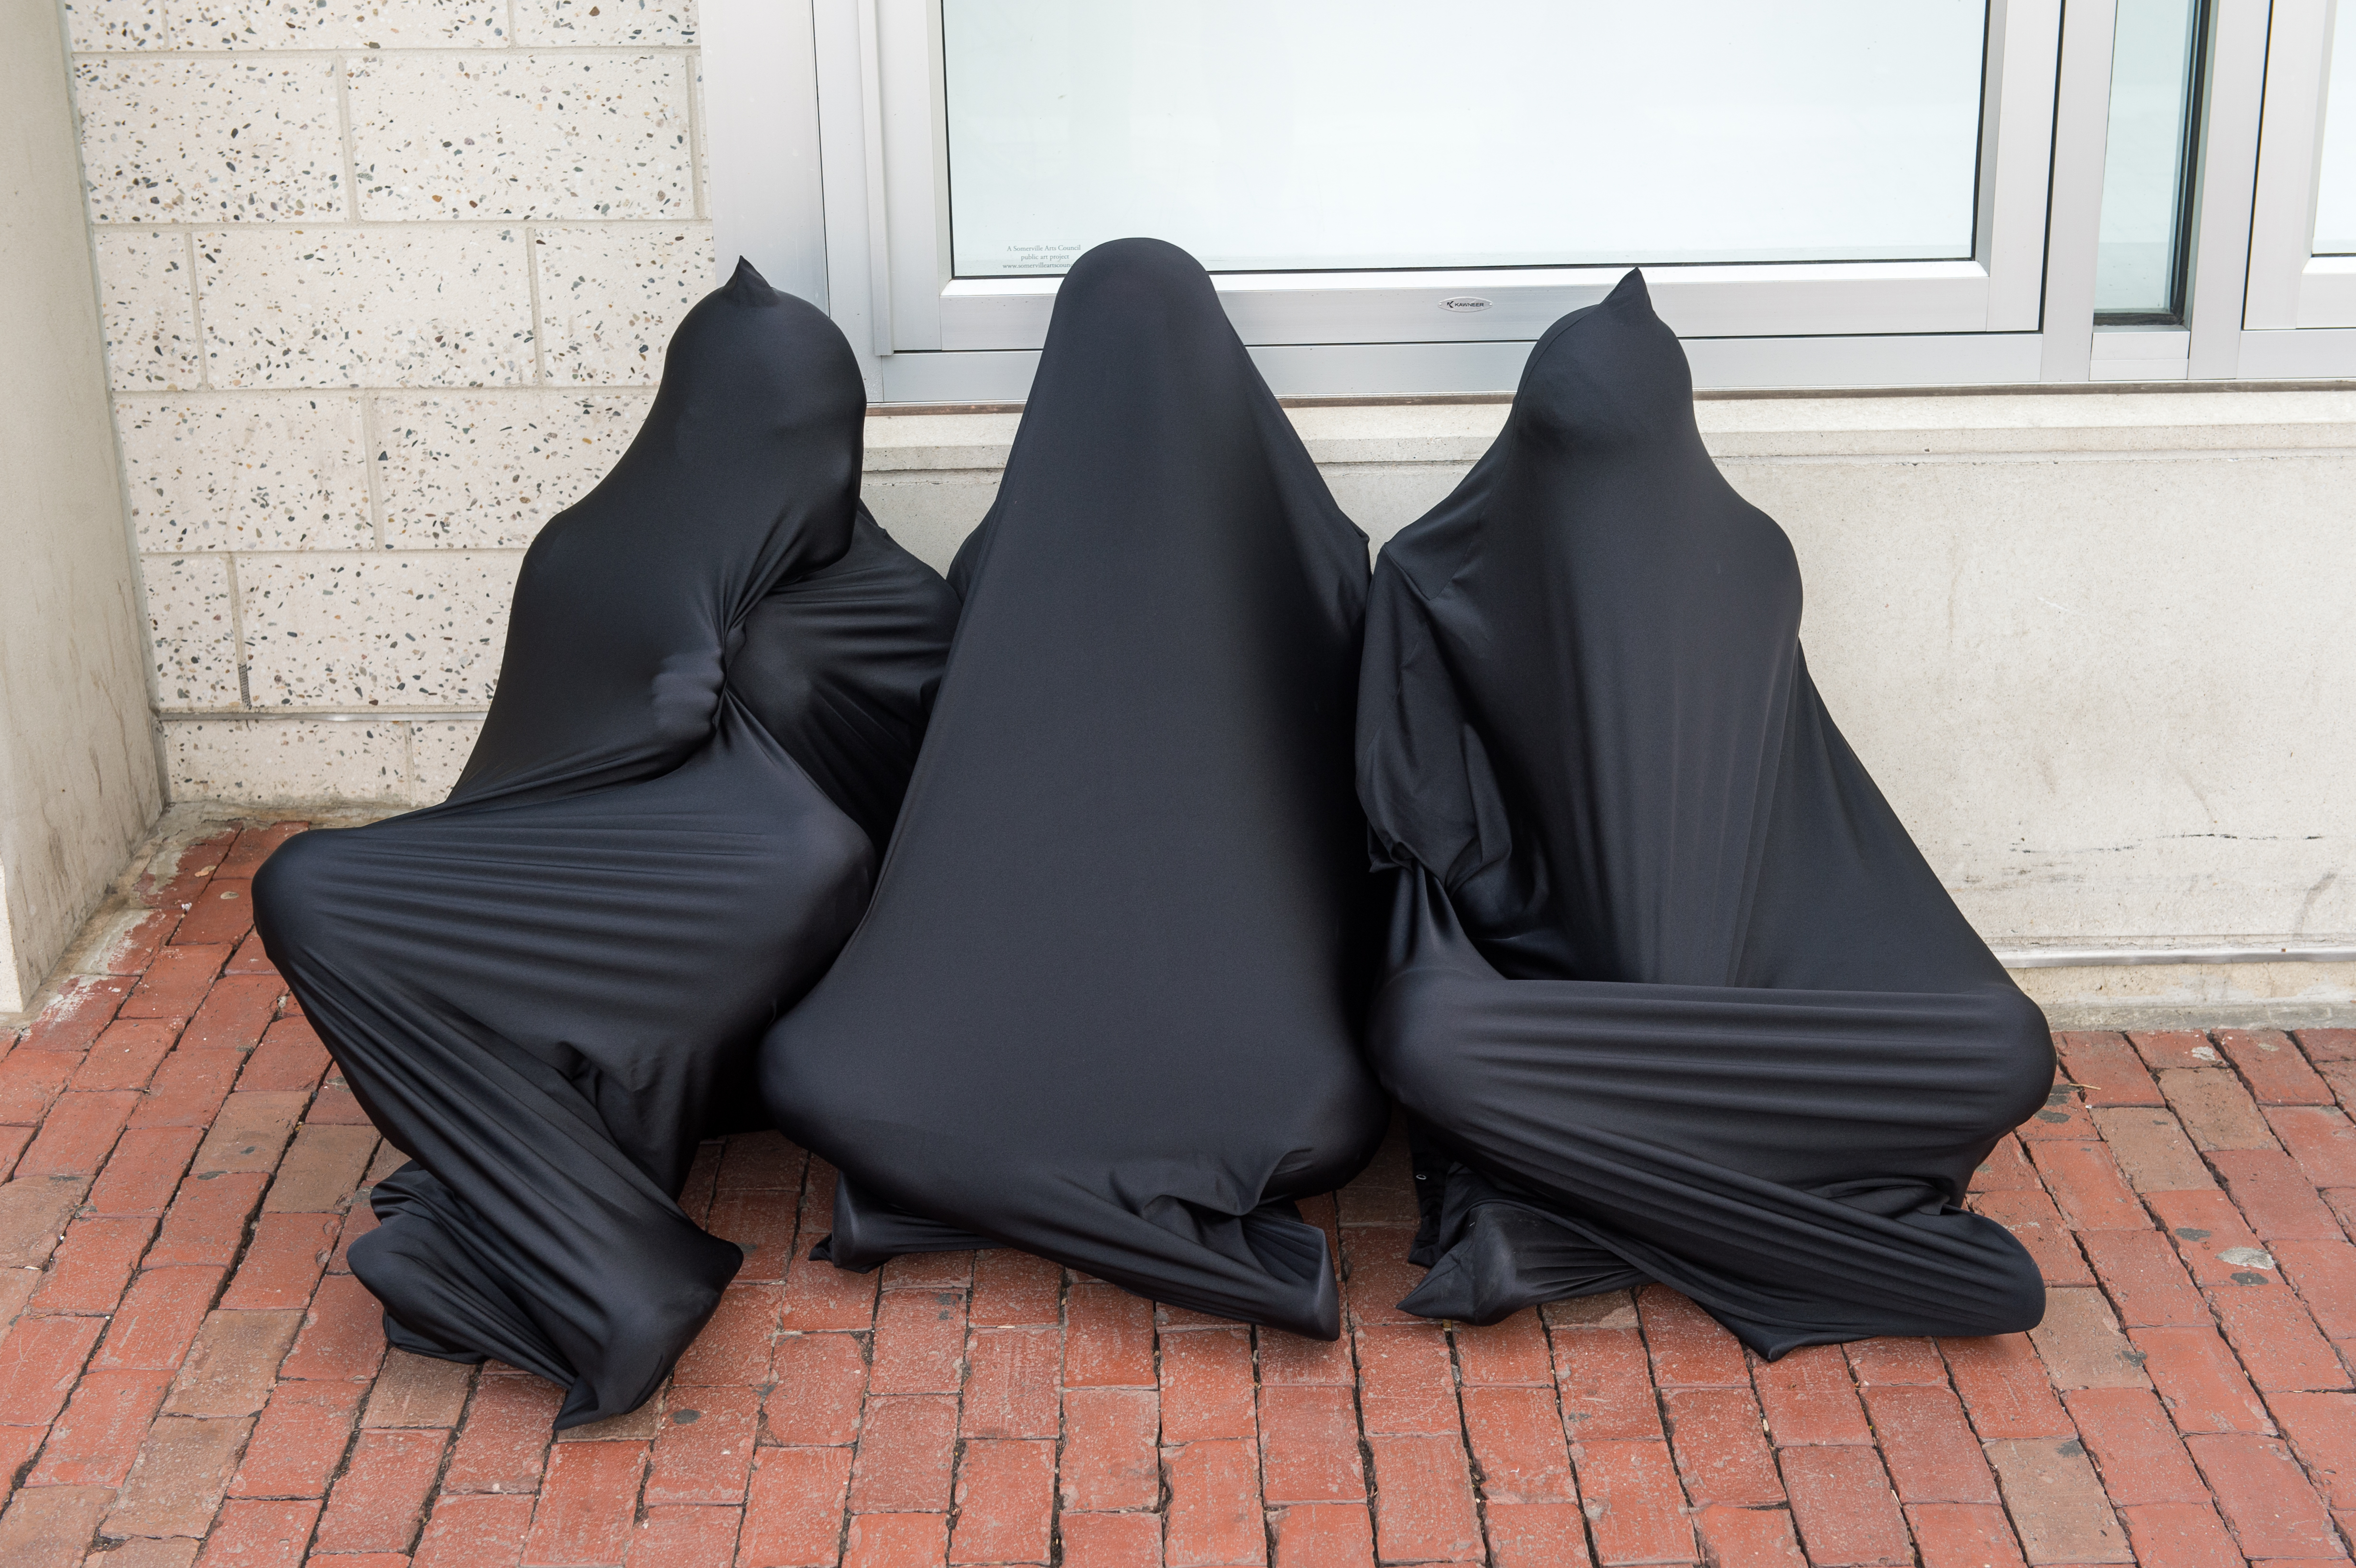 Three figures, seated outside, huddled together in separate black lycra body socks, enveloping their entire bodies.